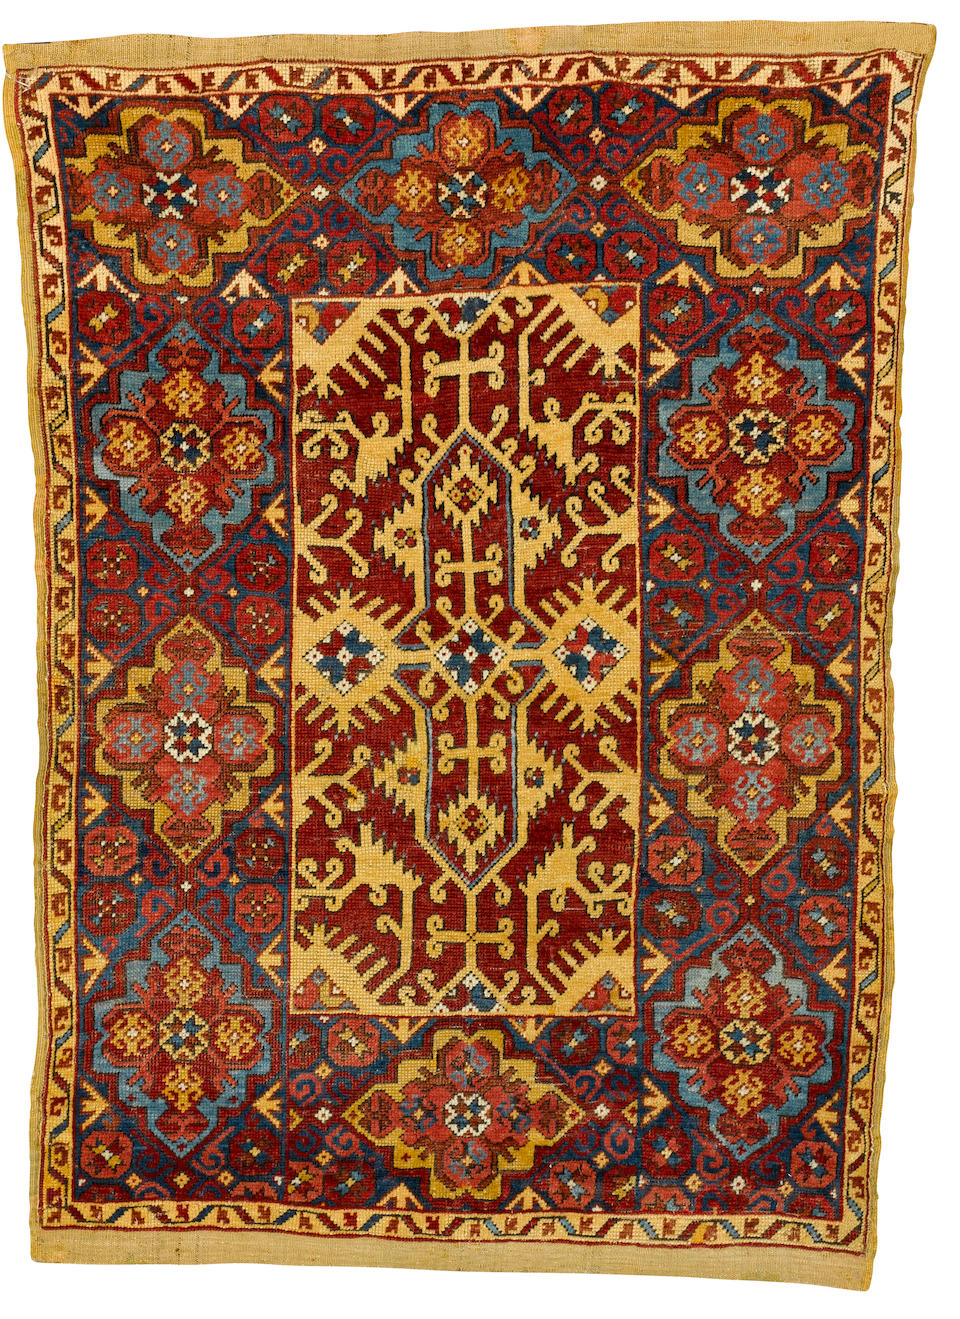 An Ushak rug of Lotto design West Anatolia, late 18th century 5 ft 6 in x 3 ft 10 in (168 x 117 cm ) restorations